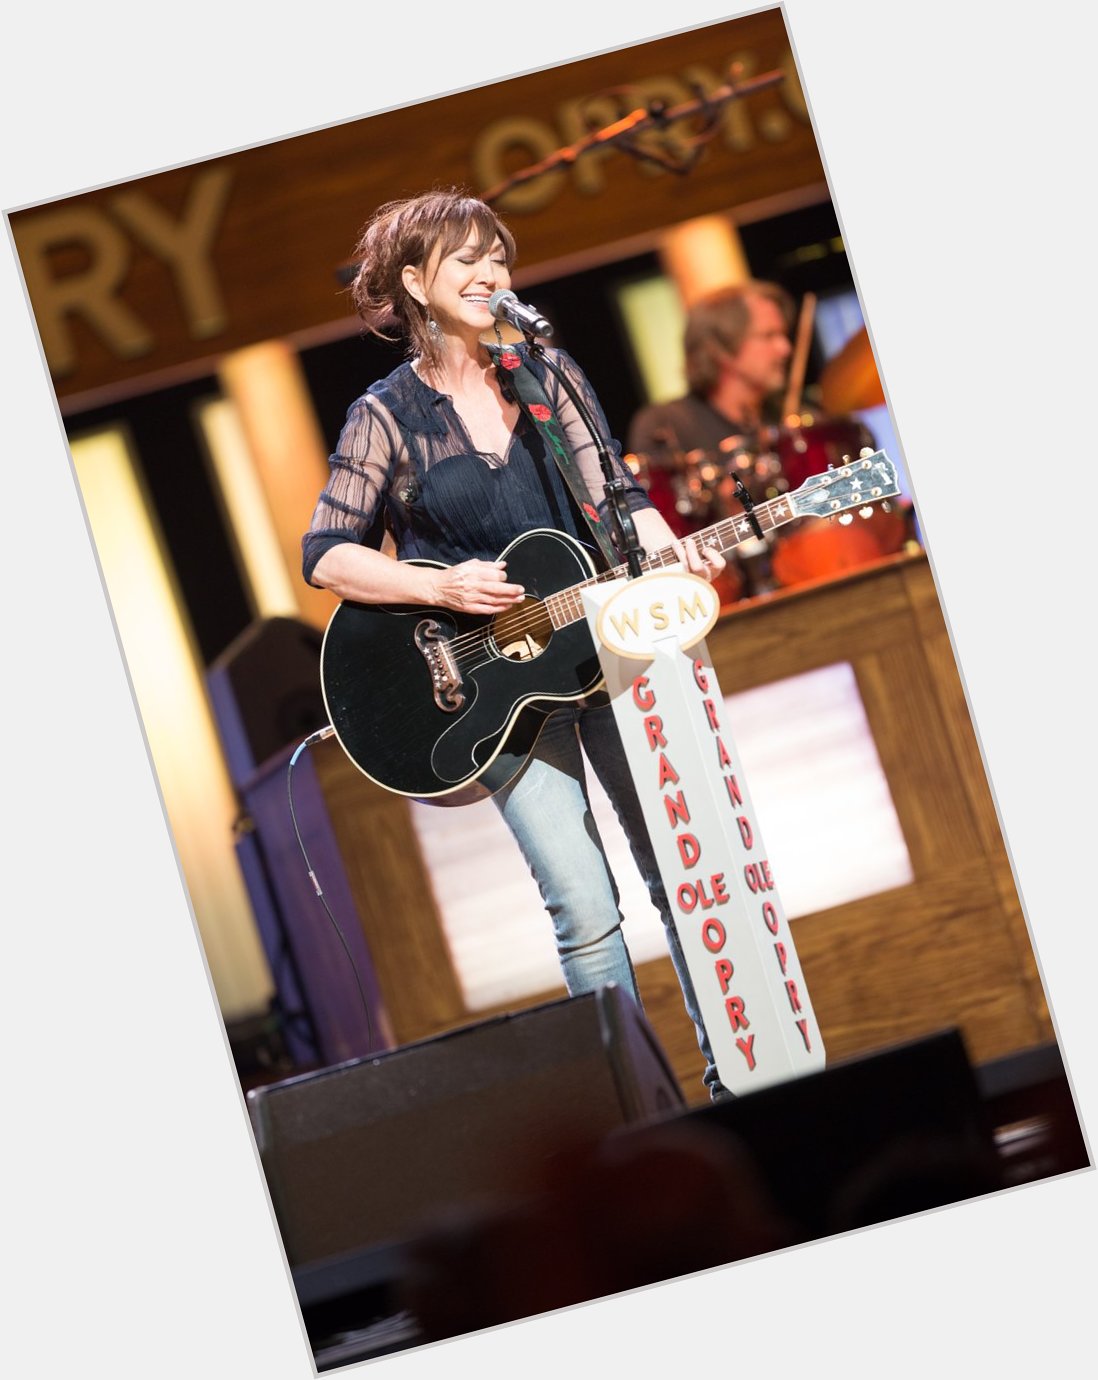 Join us in wishing Opry star Pam Tillis a very happy birthday today! 